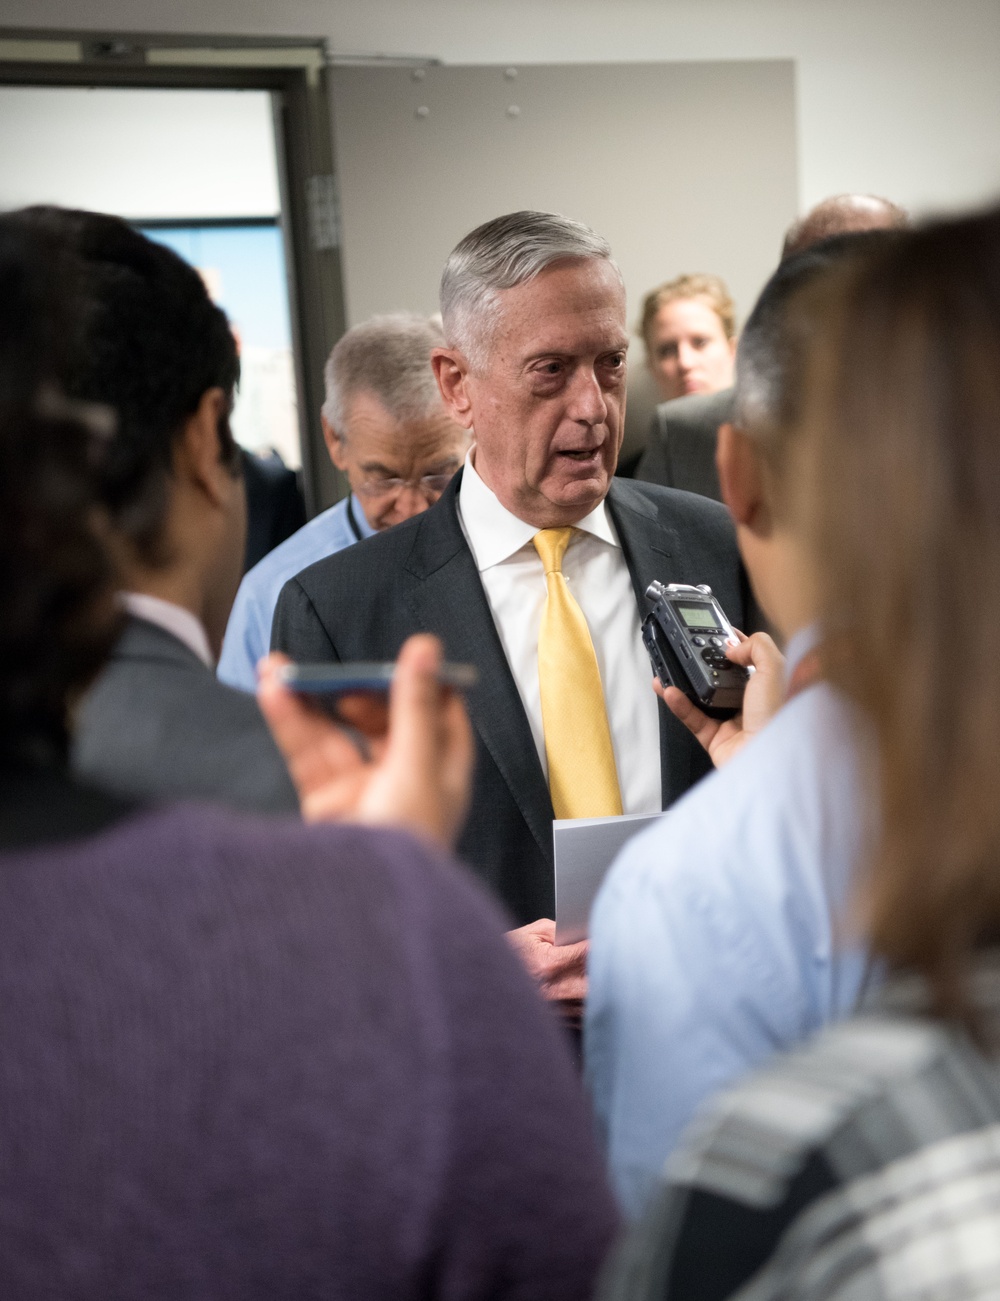 SD speaks to reporters at the Pentagon